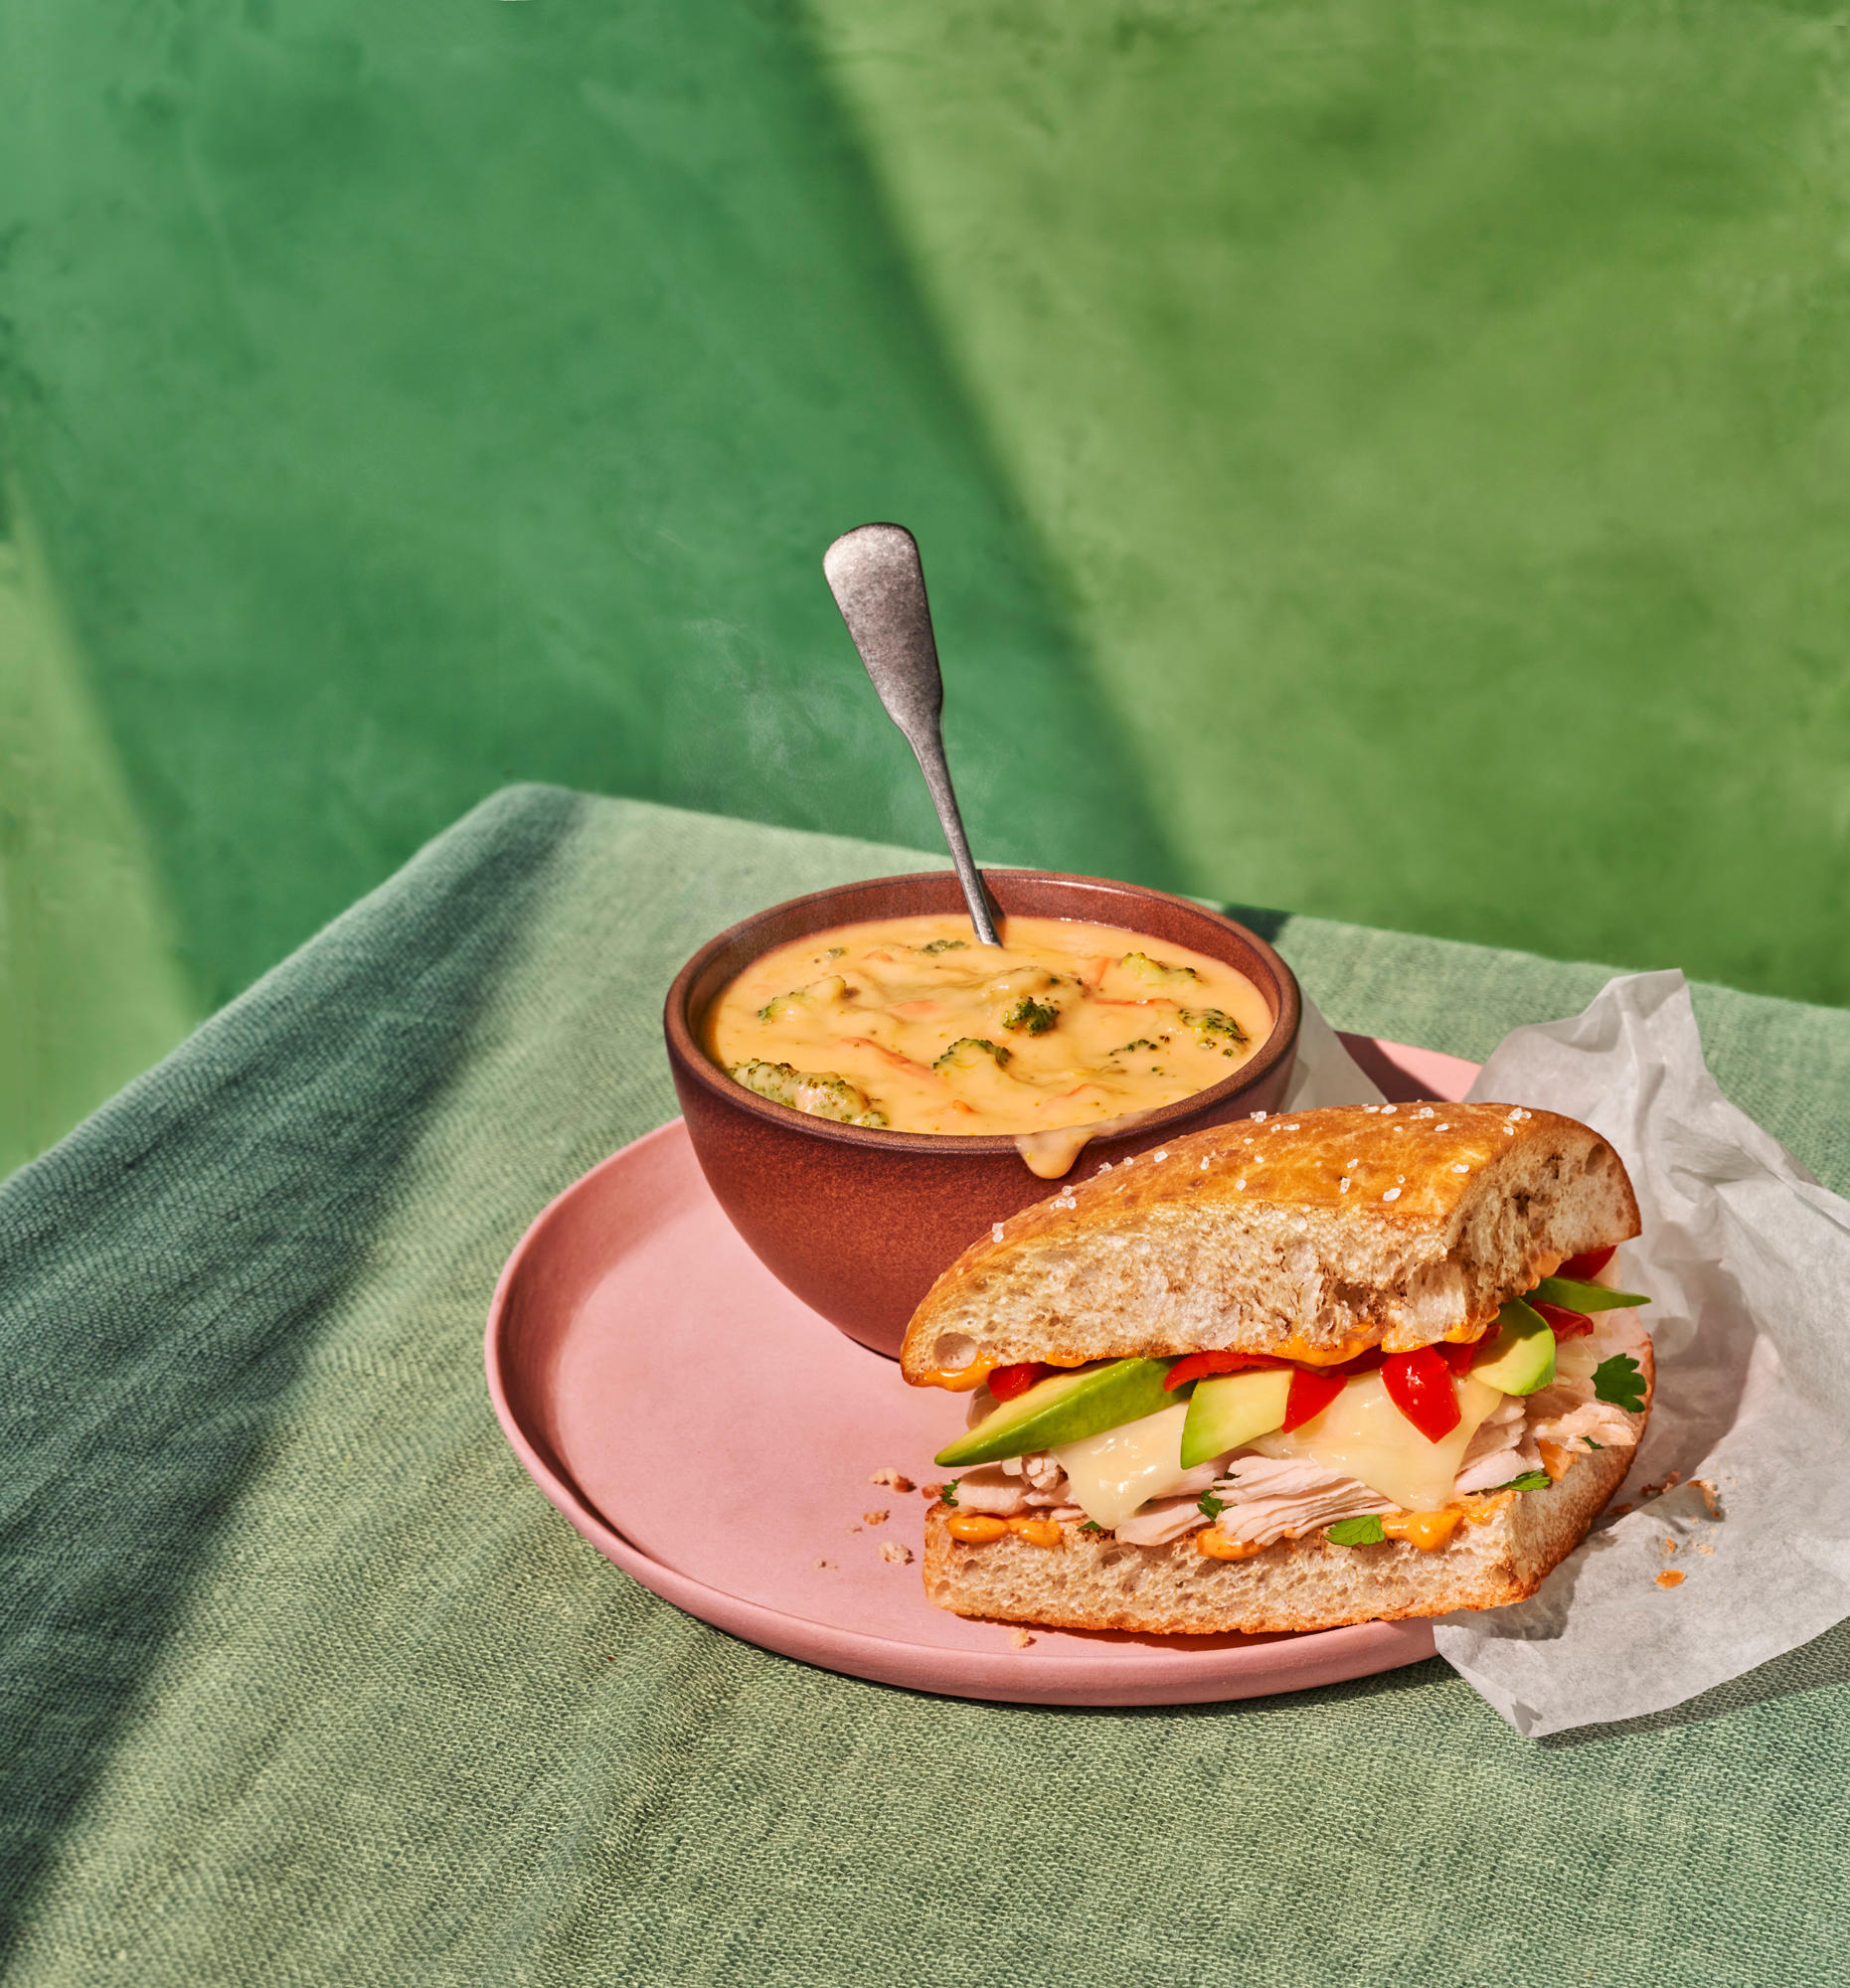 Chipotle Chicken Avo Melt & Broccoli Cheddar Soup Cup You Pick 2 Panera Bread Tracy (209)855-8014